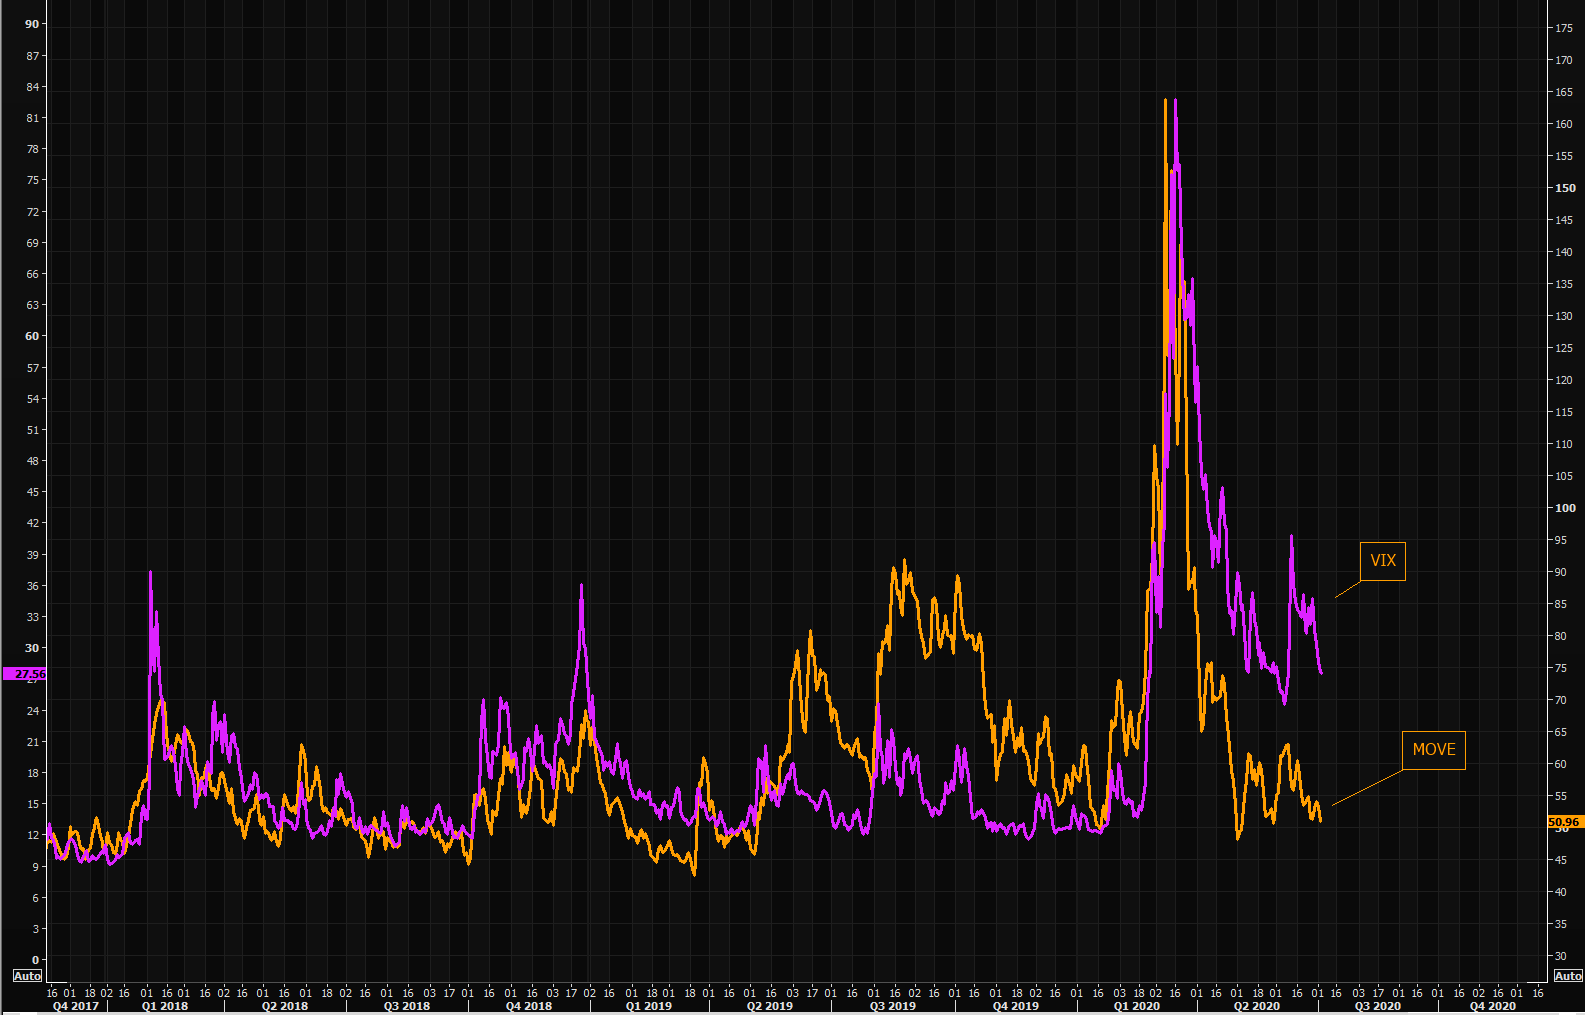 MOVE moving lower - will VIX catch up "violently"